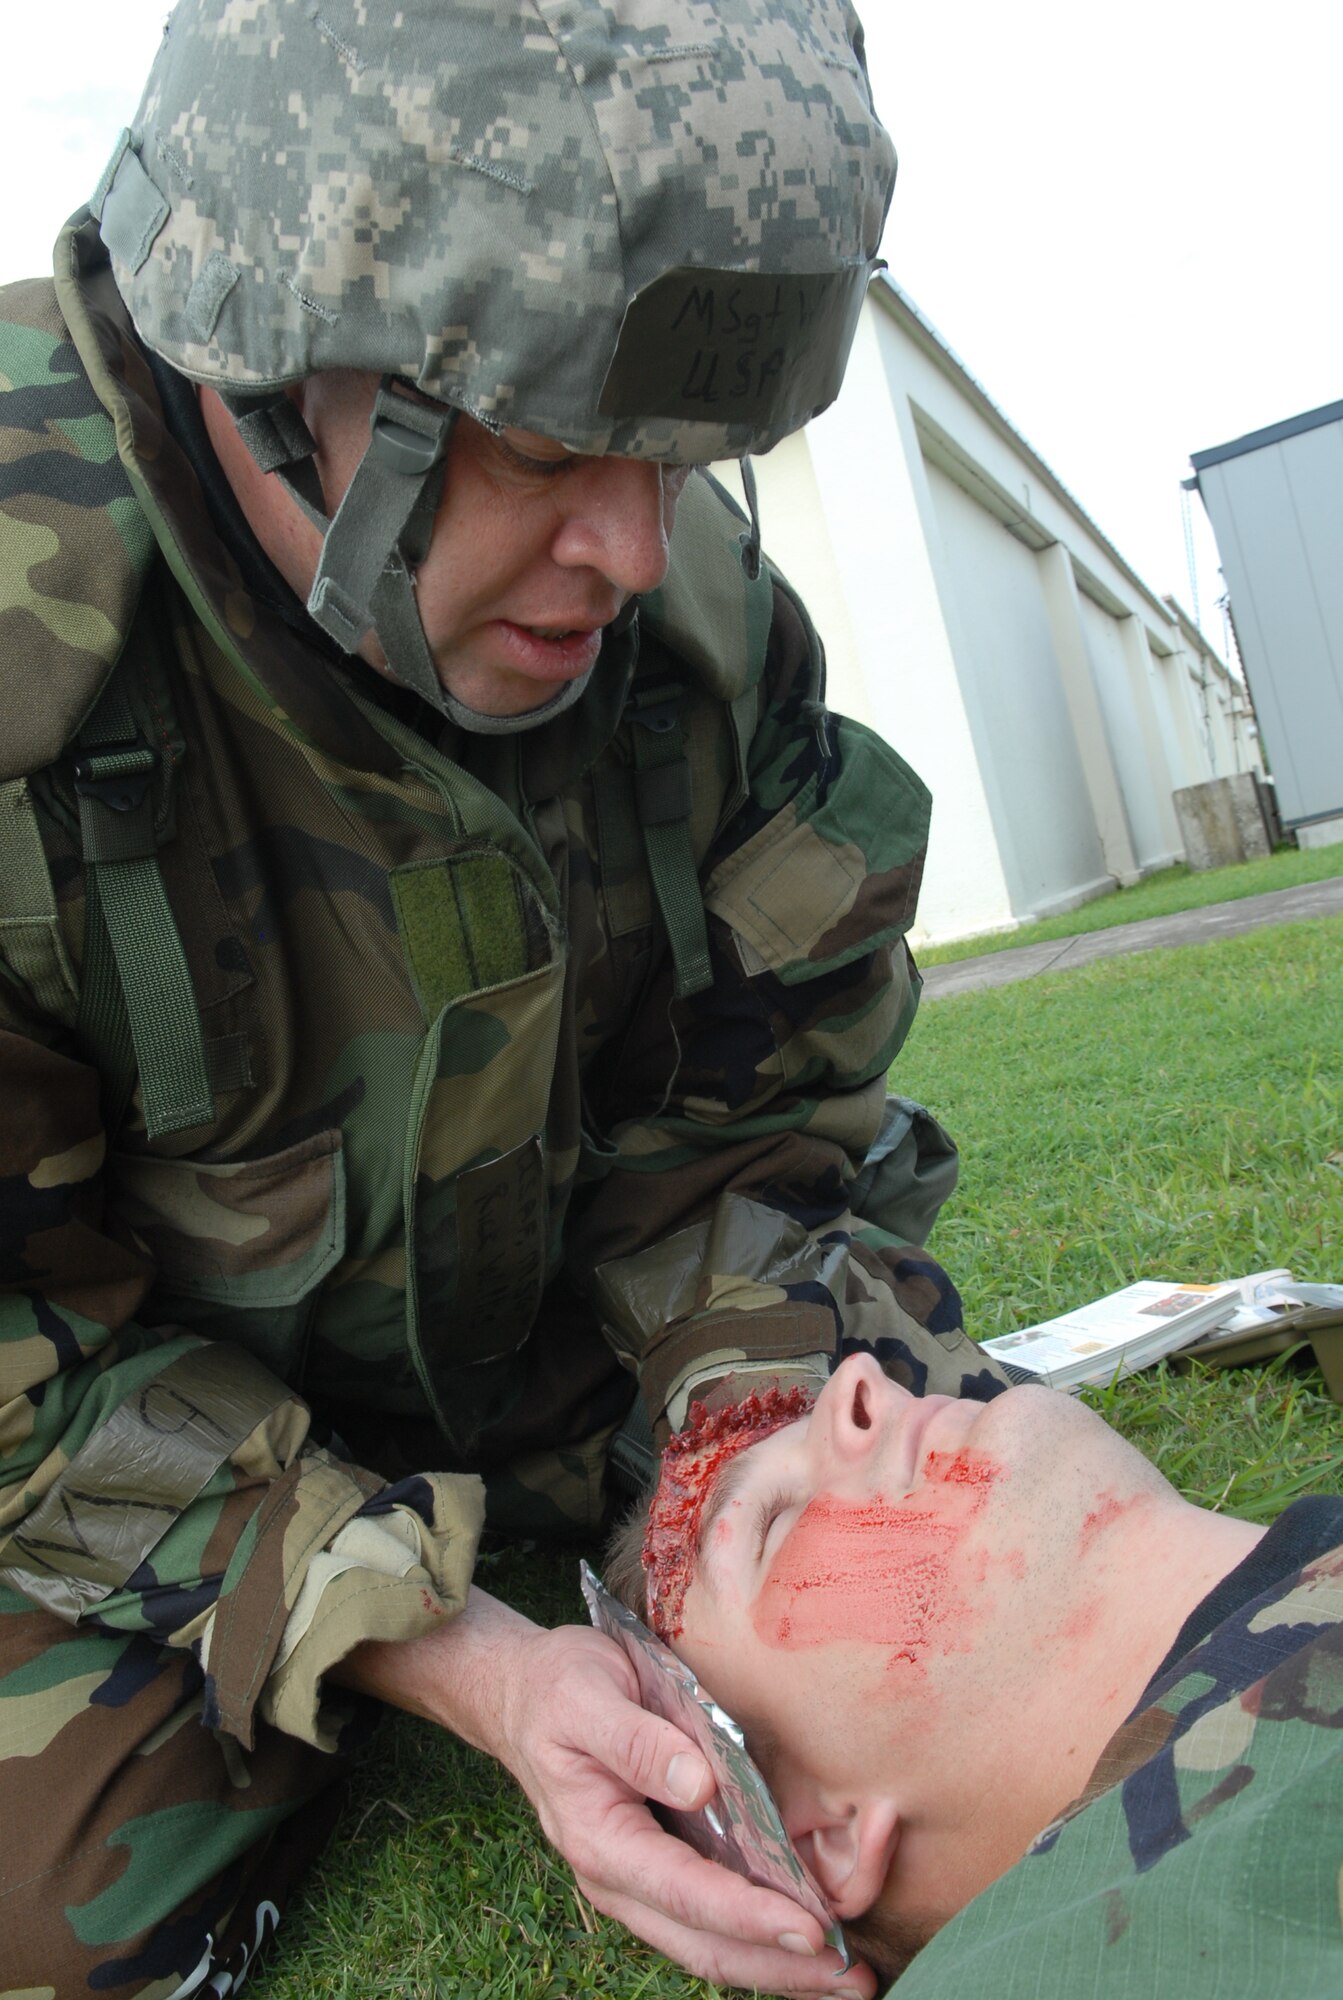 Master Sgt. Ricky Willis from the 18th Communications Squadron gives first aid to Staff Sgt. Christopher Hummel, 18th Wing Public Affairs, as part of a training scenario during the local operational readiness exercise at Kadena Air Base Oct. 22. (U.S. Air Force photo / Junko Kinjo)